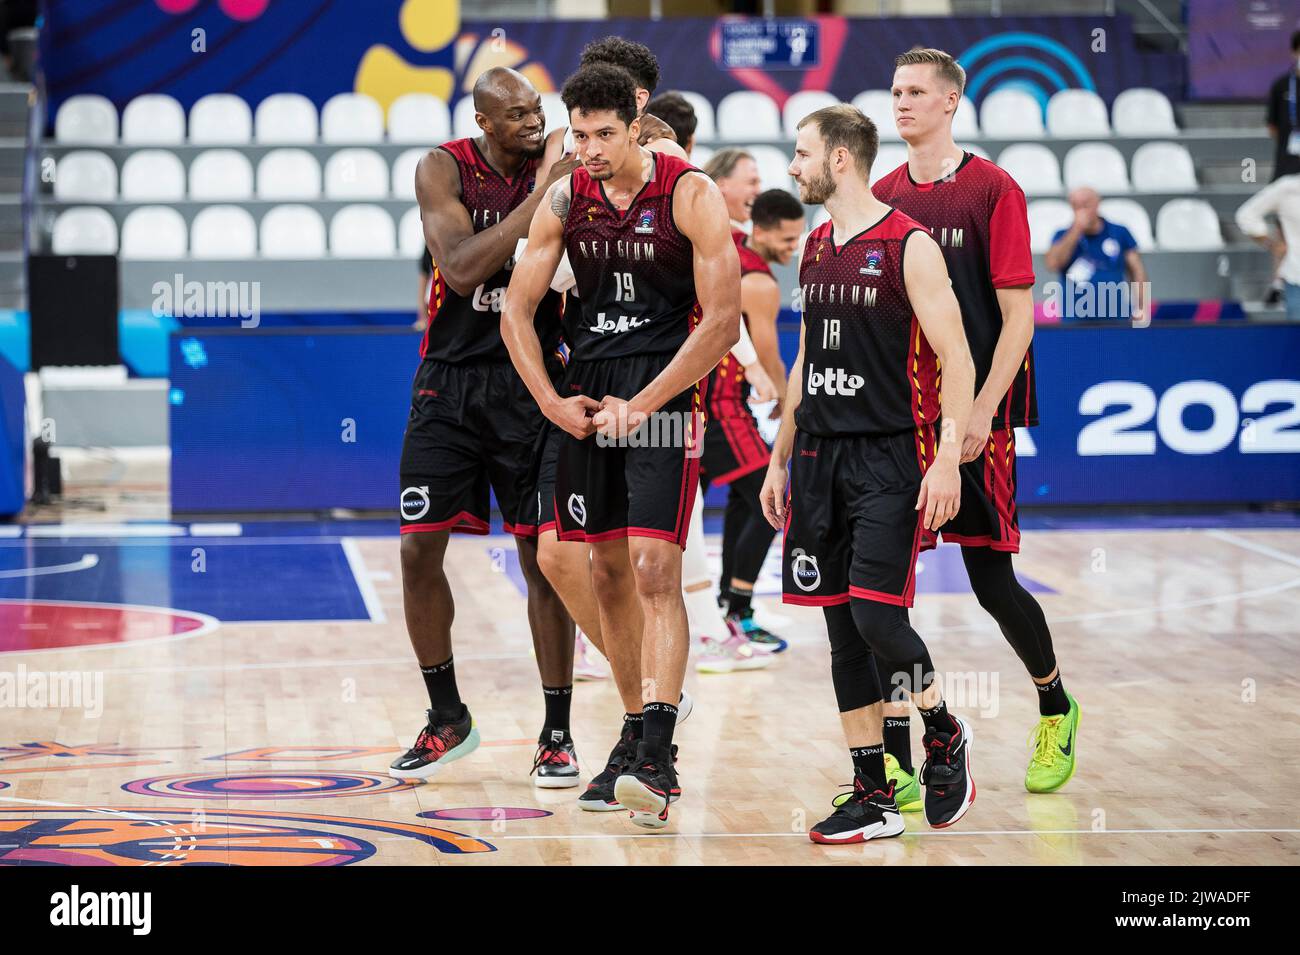 Belgium's players celebrate after winning the match between Spain and the  Belgian Lions, game three of five in group A at the EuroBasket 2022, Sunday  04 September 2022, at the Tbilisi Sports